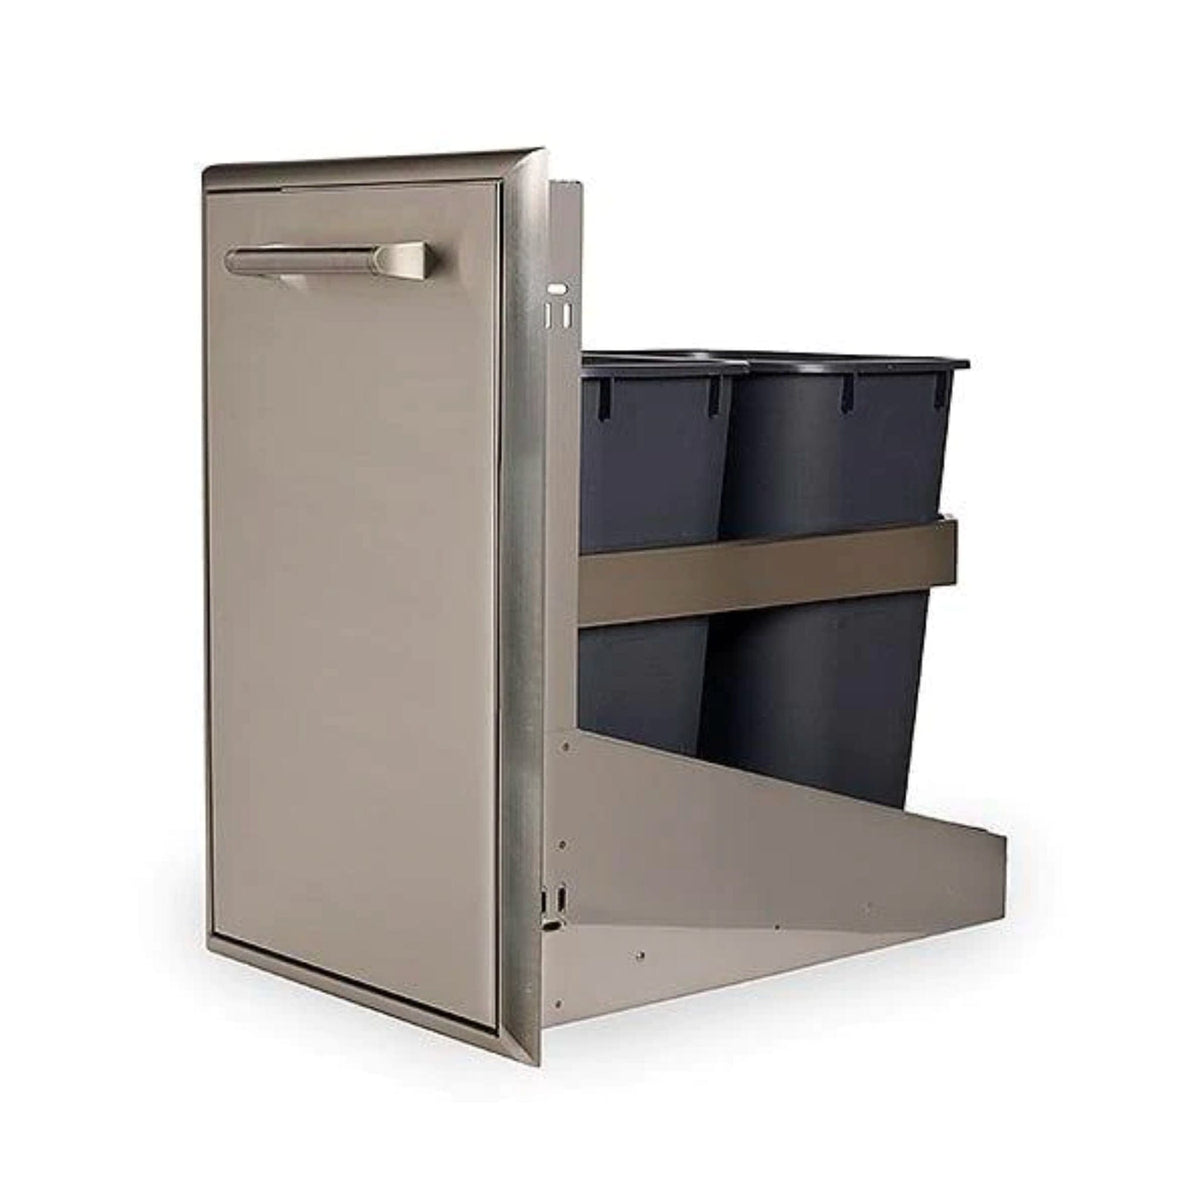 Coyote Stainless Steel Pull Out Trash &amp; Recycle Combo With 2 13 gal. Bins